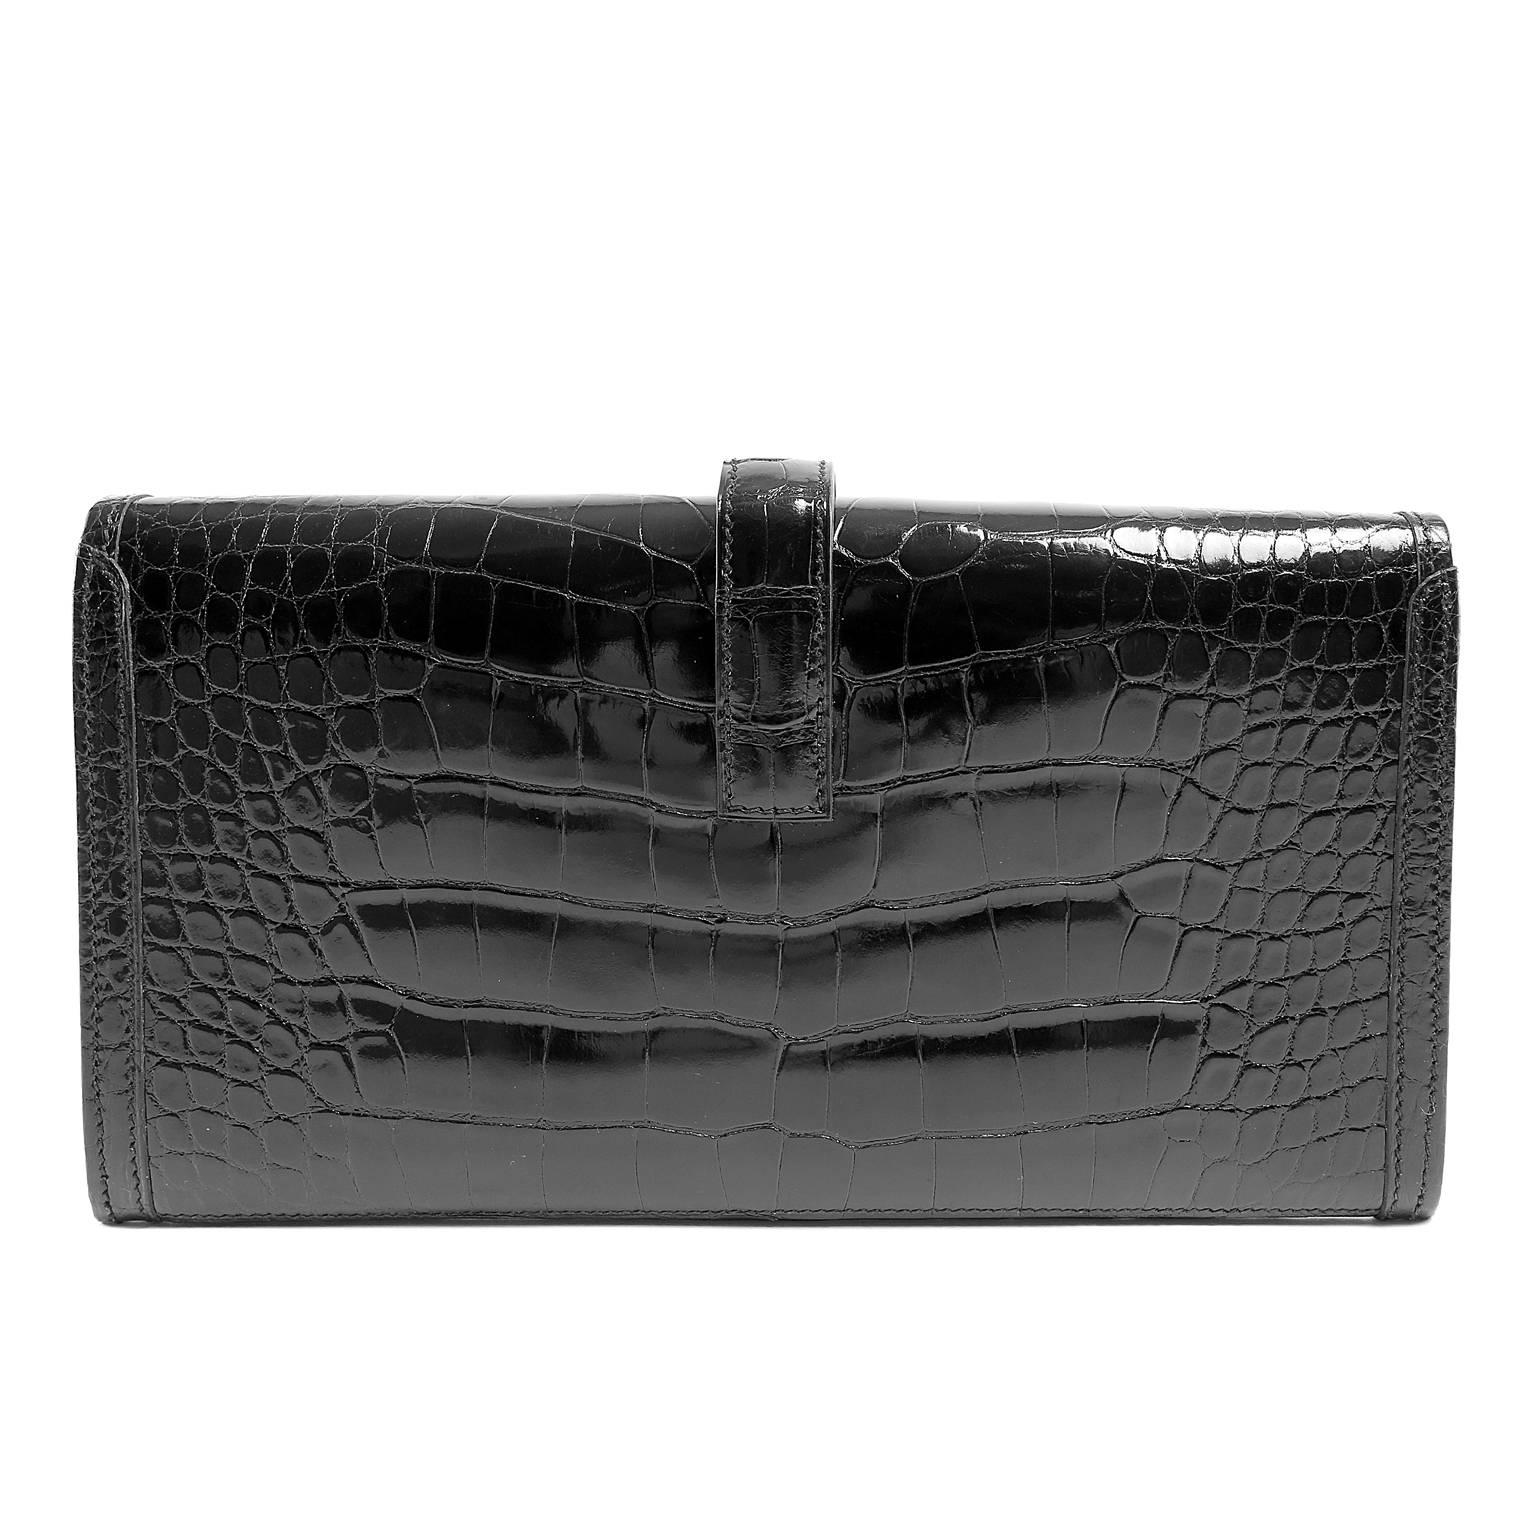 Hermès Black Alligator Jige Clutch- PRISTINE;  appears never carried.  Considered highly collectible, an exotic Hermès bag is very rare.  The highest quality skins are used to make each piece by hand.  Exotics are naturally more expensive than